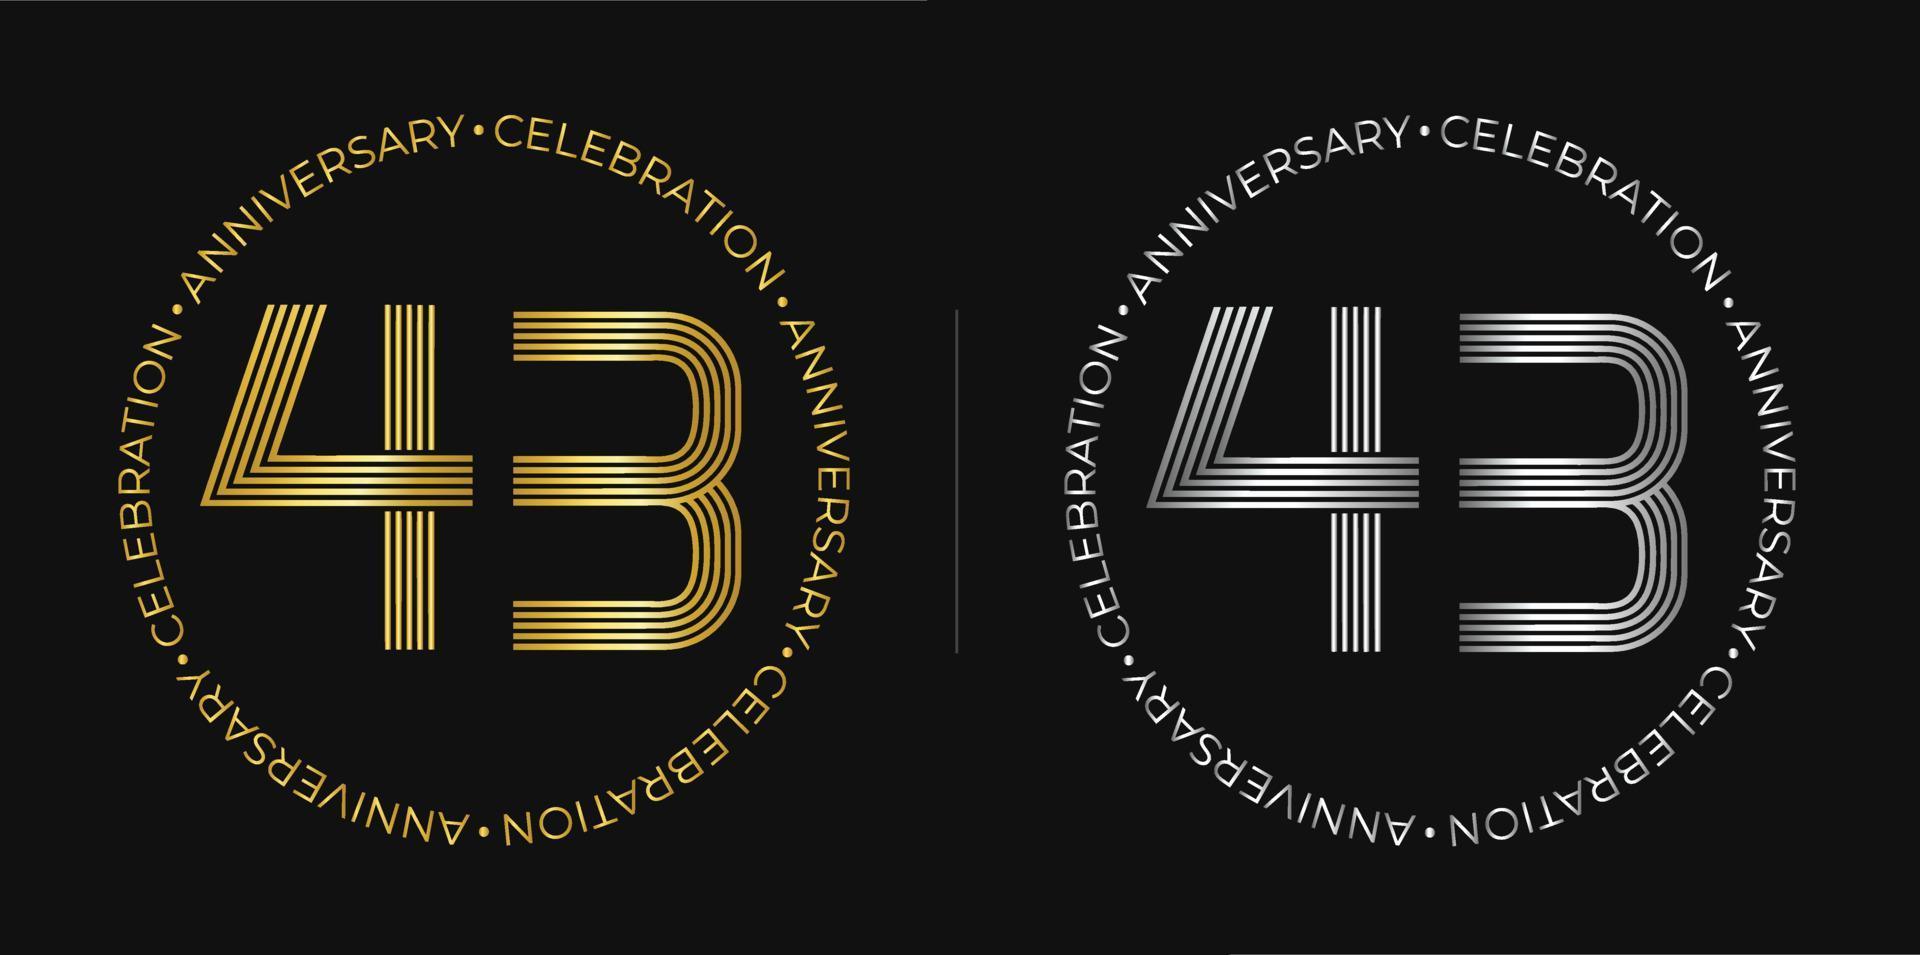 43th birthday. Forty-three years anniversary celebration banner in golden and silver colors. Circular logo with original numbers design in elegant lines. vector